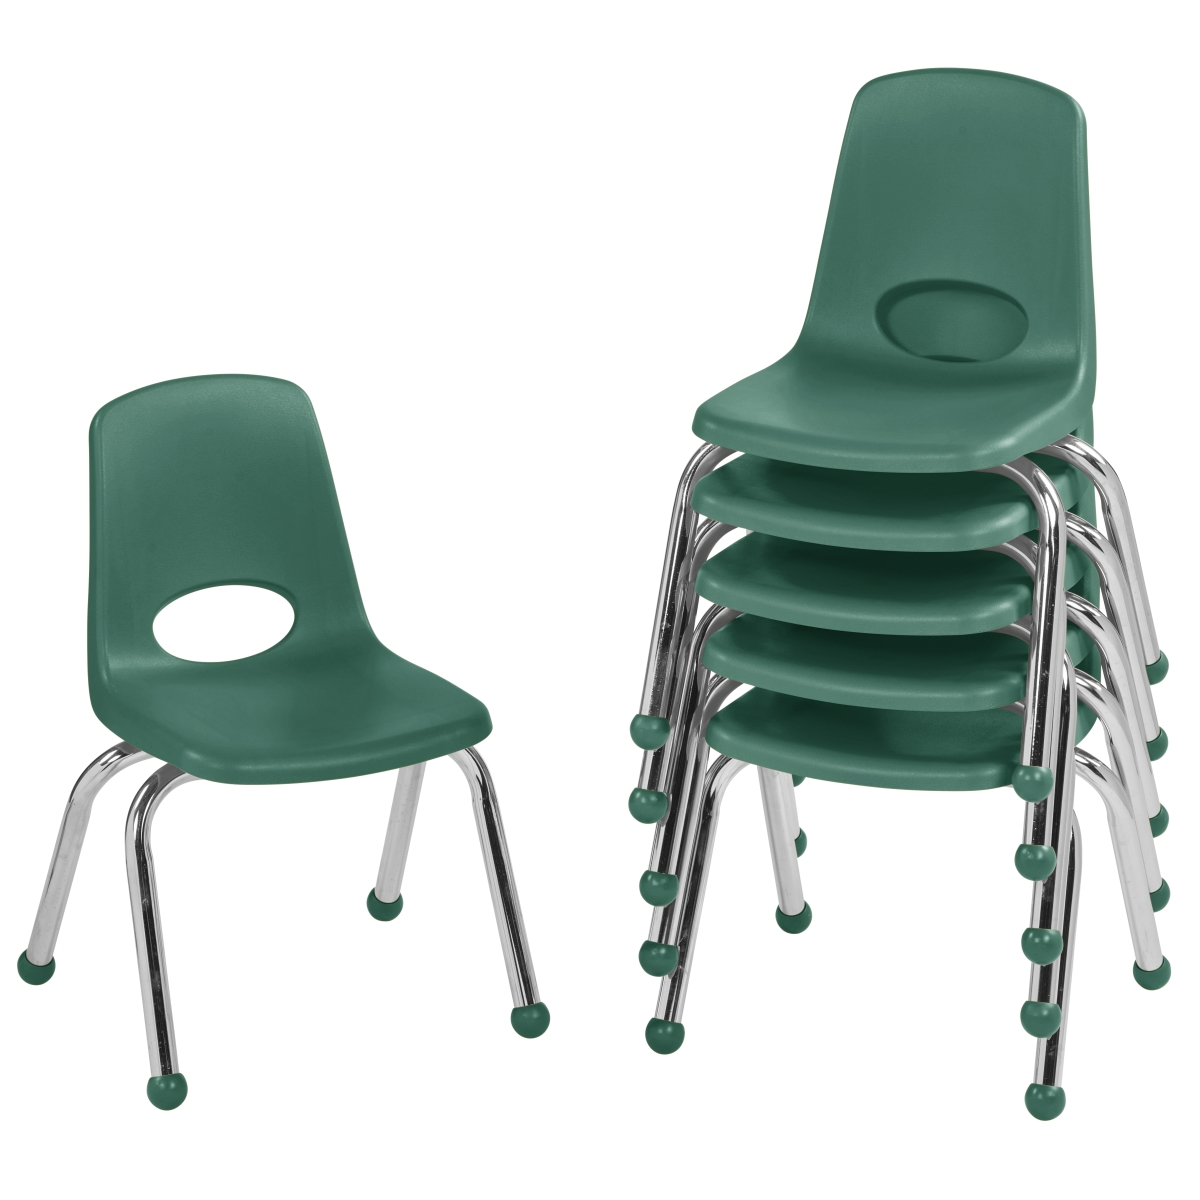 10359-gn 12 In. Stack Chair With Ball Glide - Green - Pack Of 6